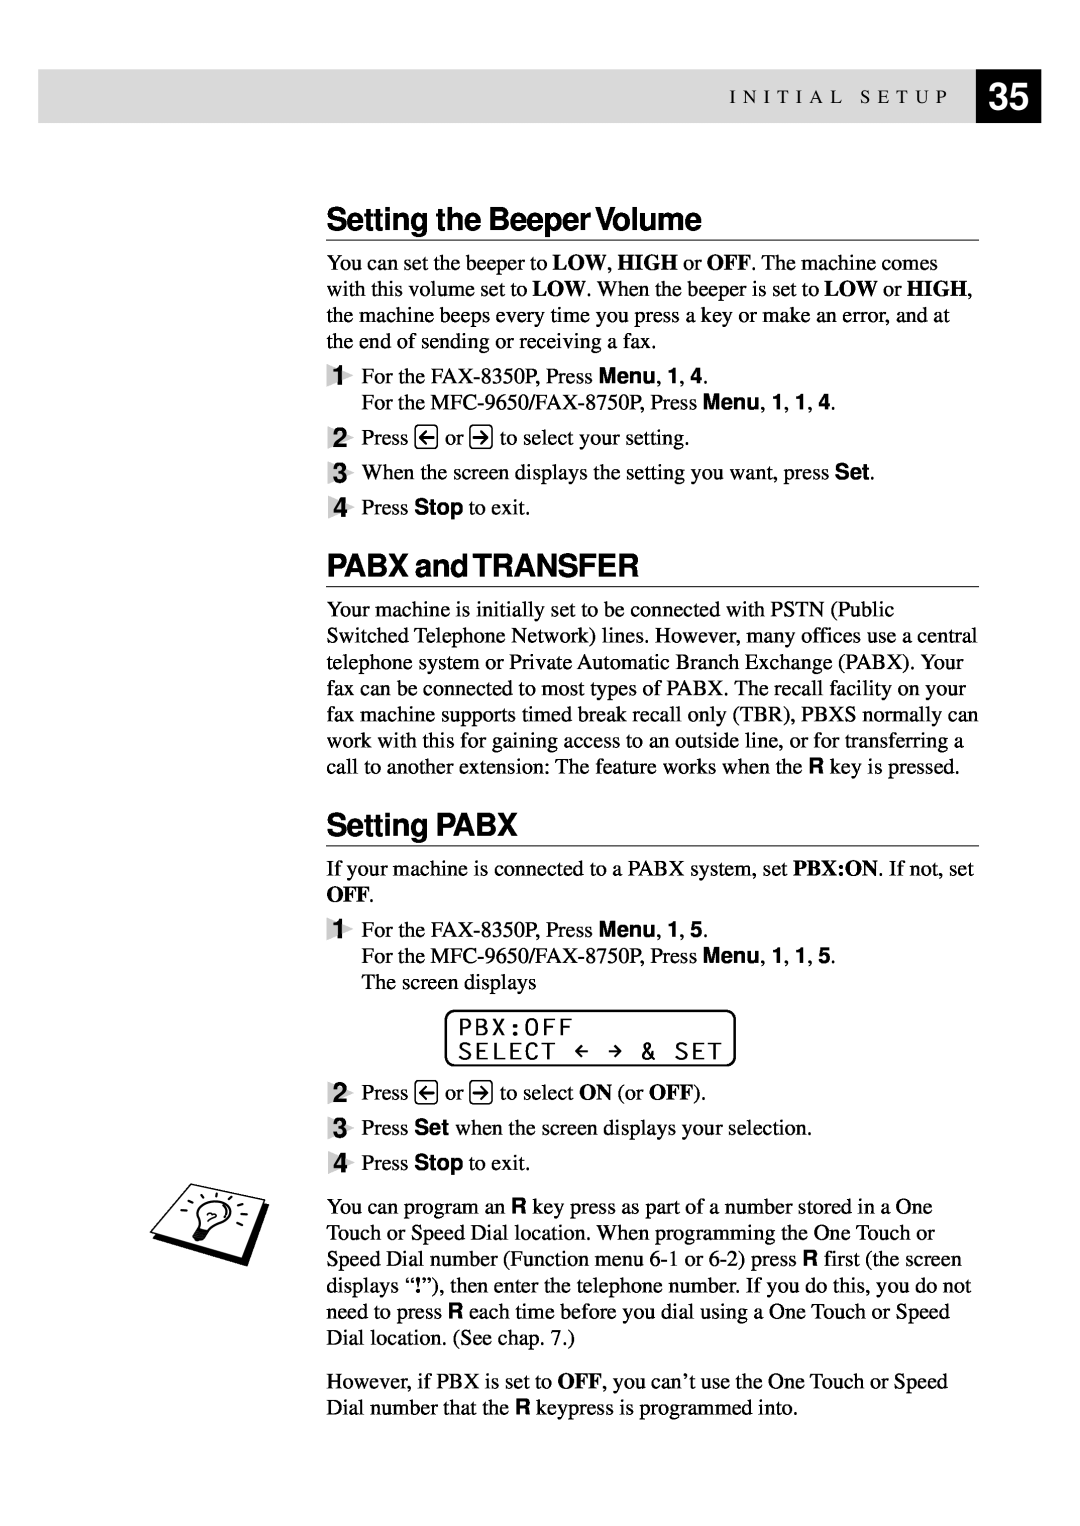 Brother MFC-9650, FAX-8350P owner manual Setting the Beeper Volume, PABX and TRANSFER, Setting PABX, Pbxoff Select & Set 